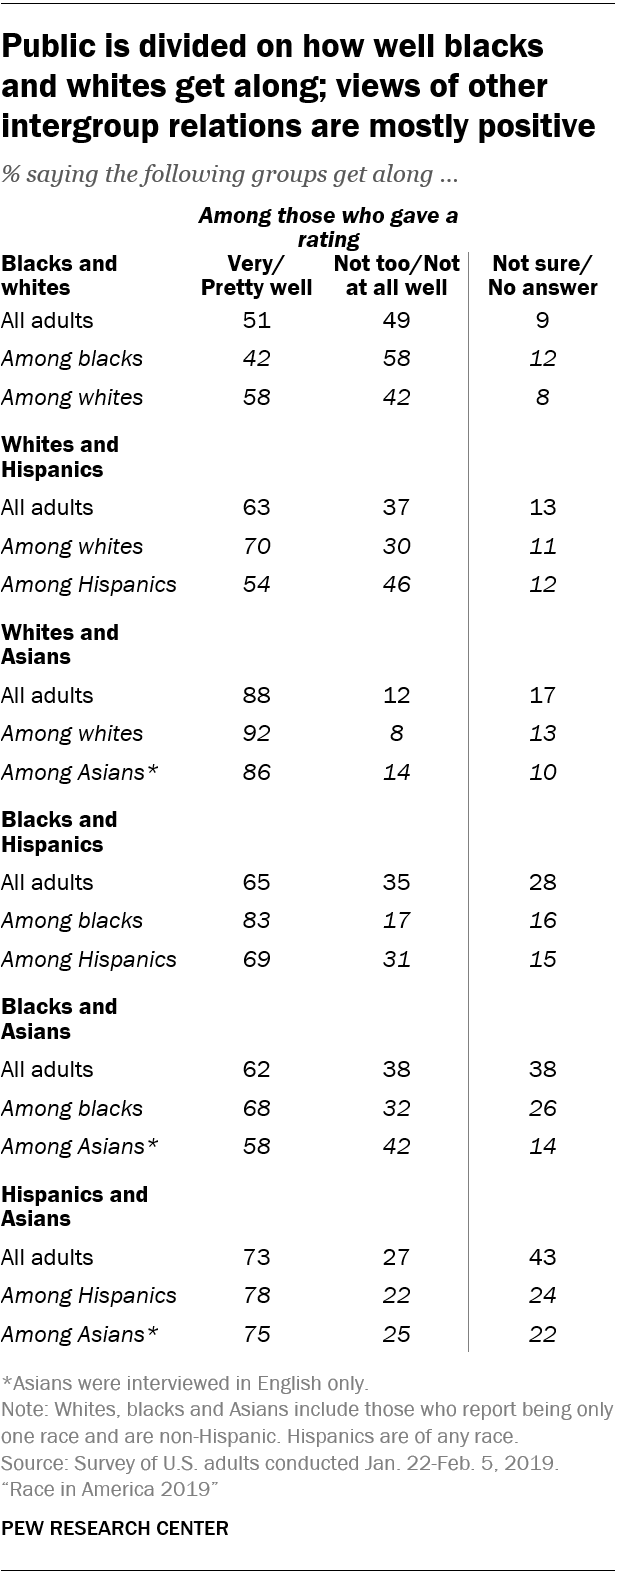 Public is divided on how well blacks and whites get along; views of other intergroup relations are mostly positive